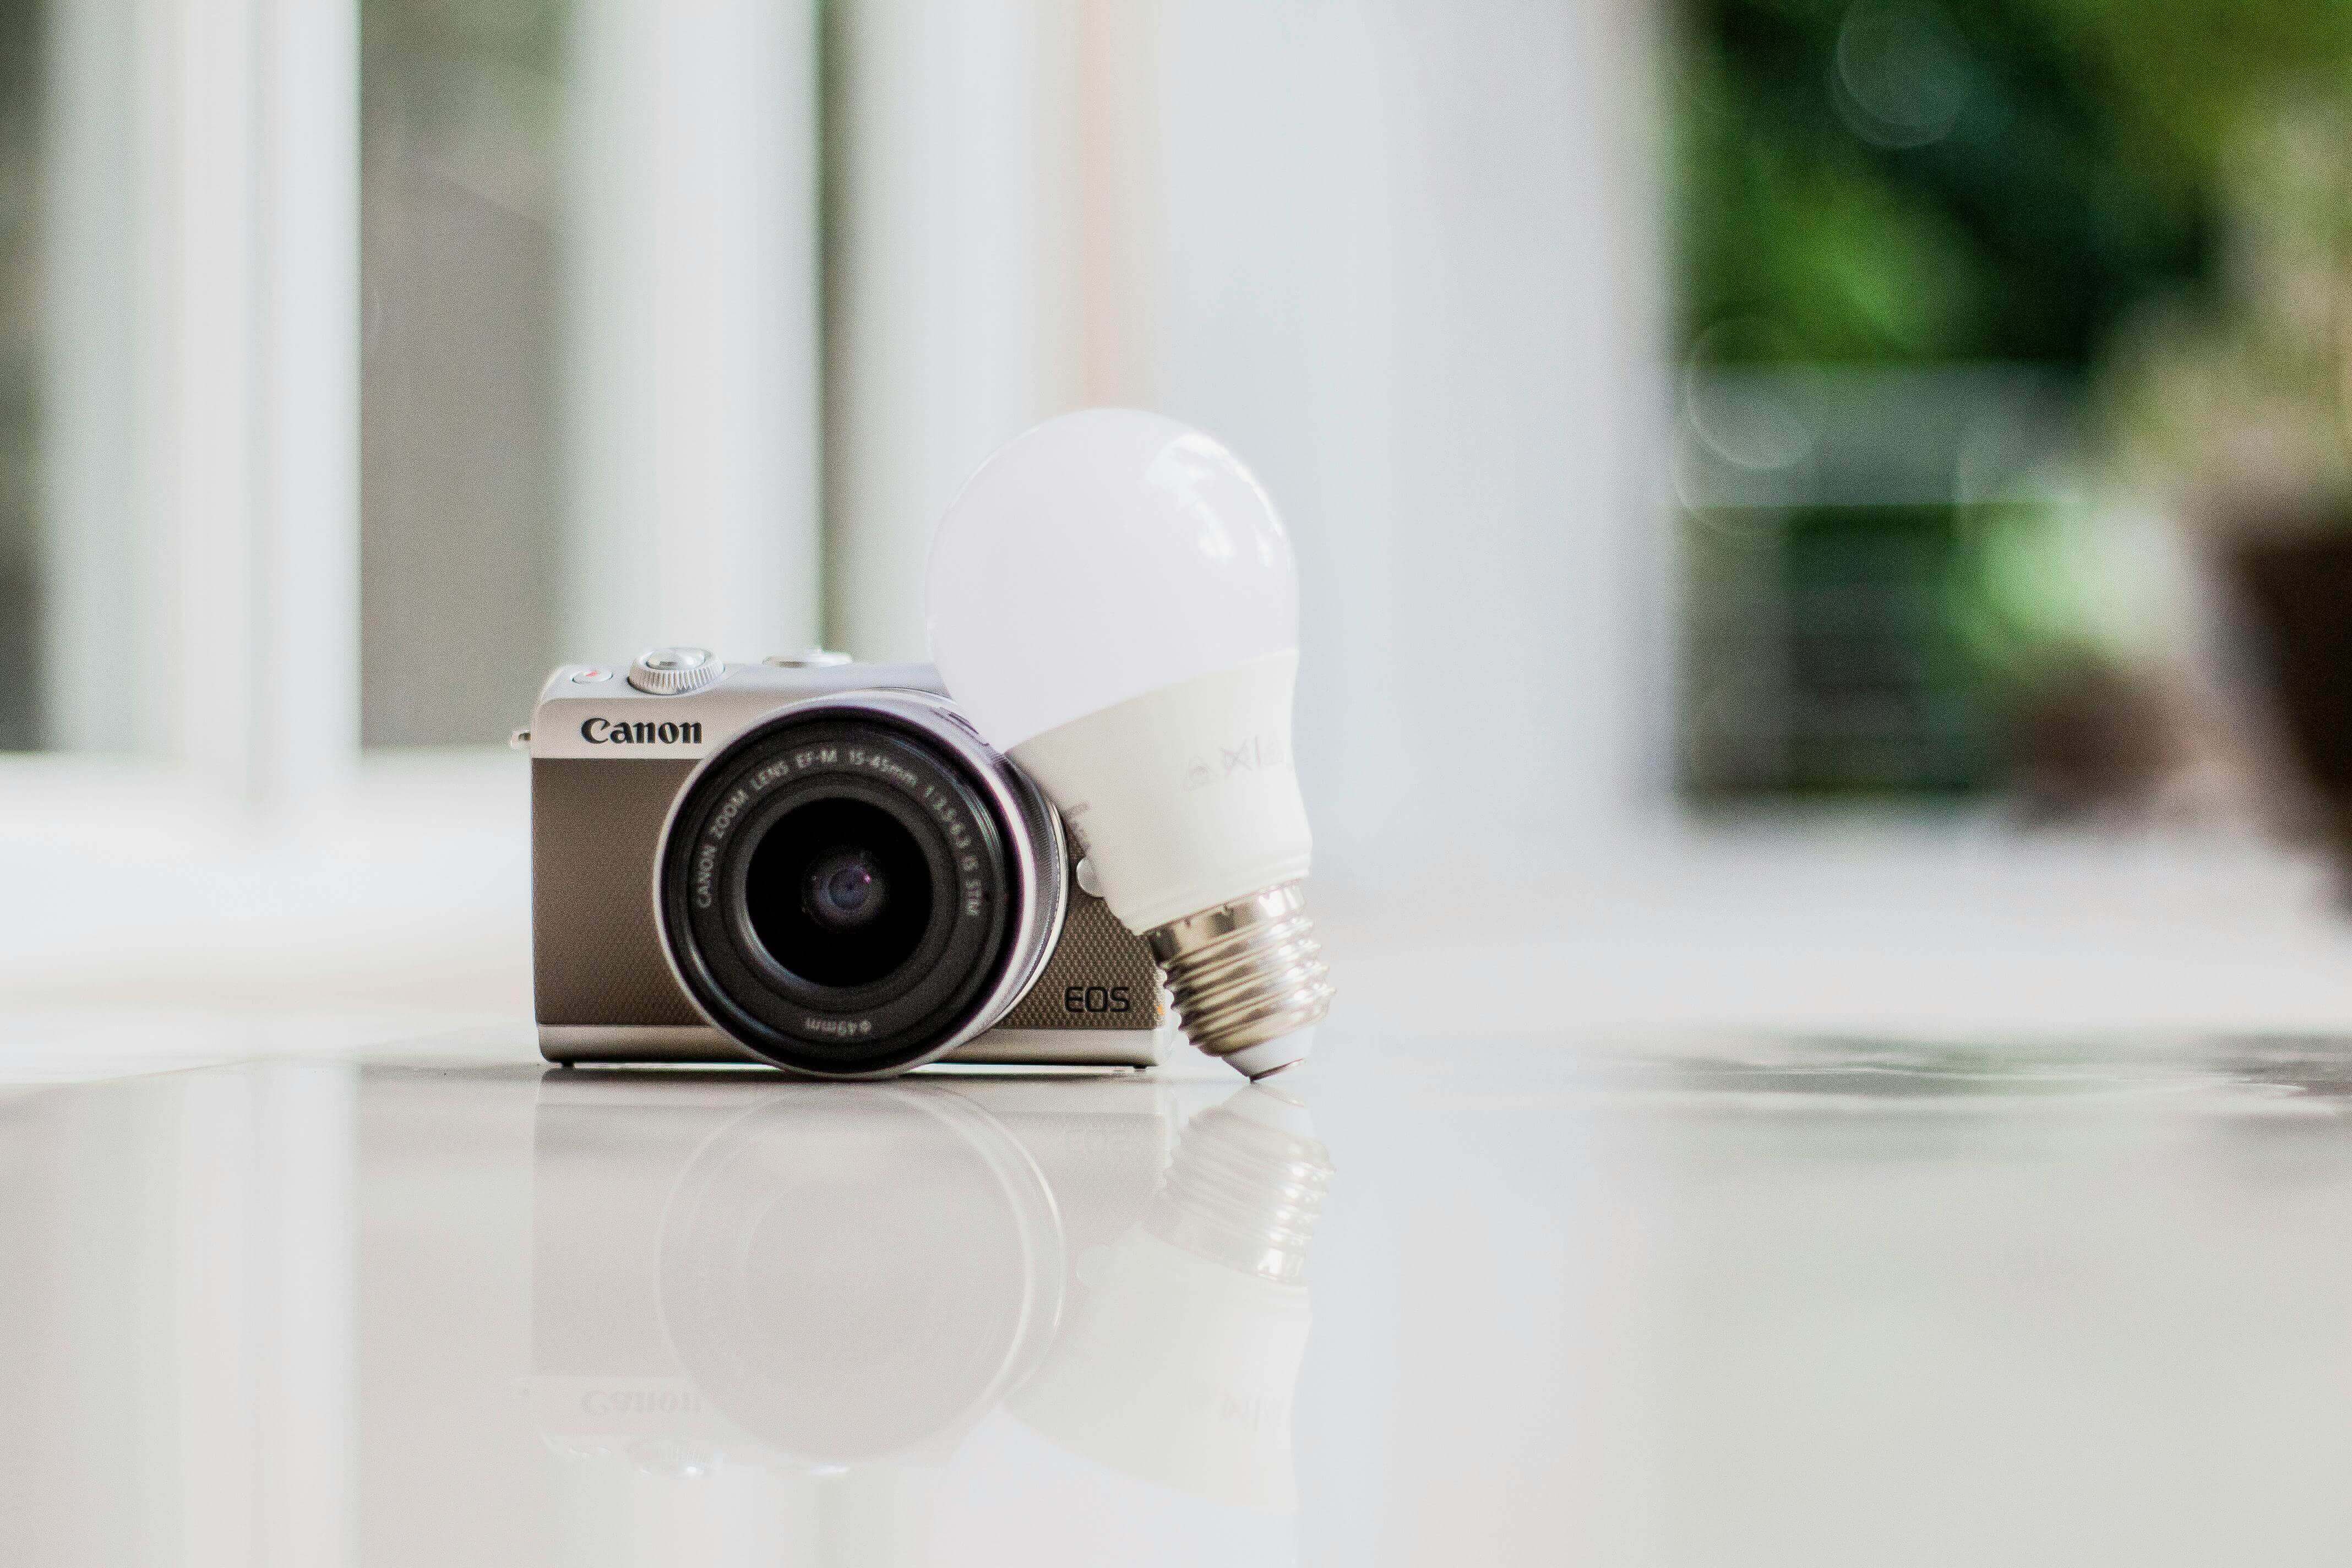 Does the light bulb security camera really work? - SecureHavenCo